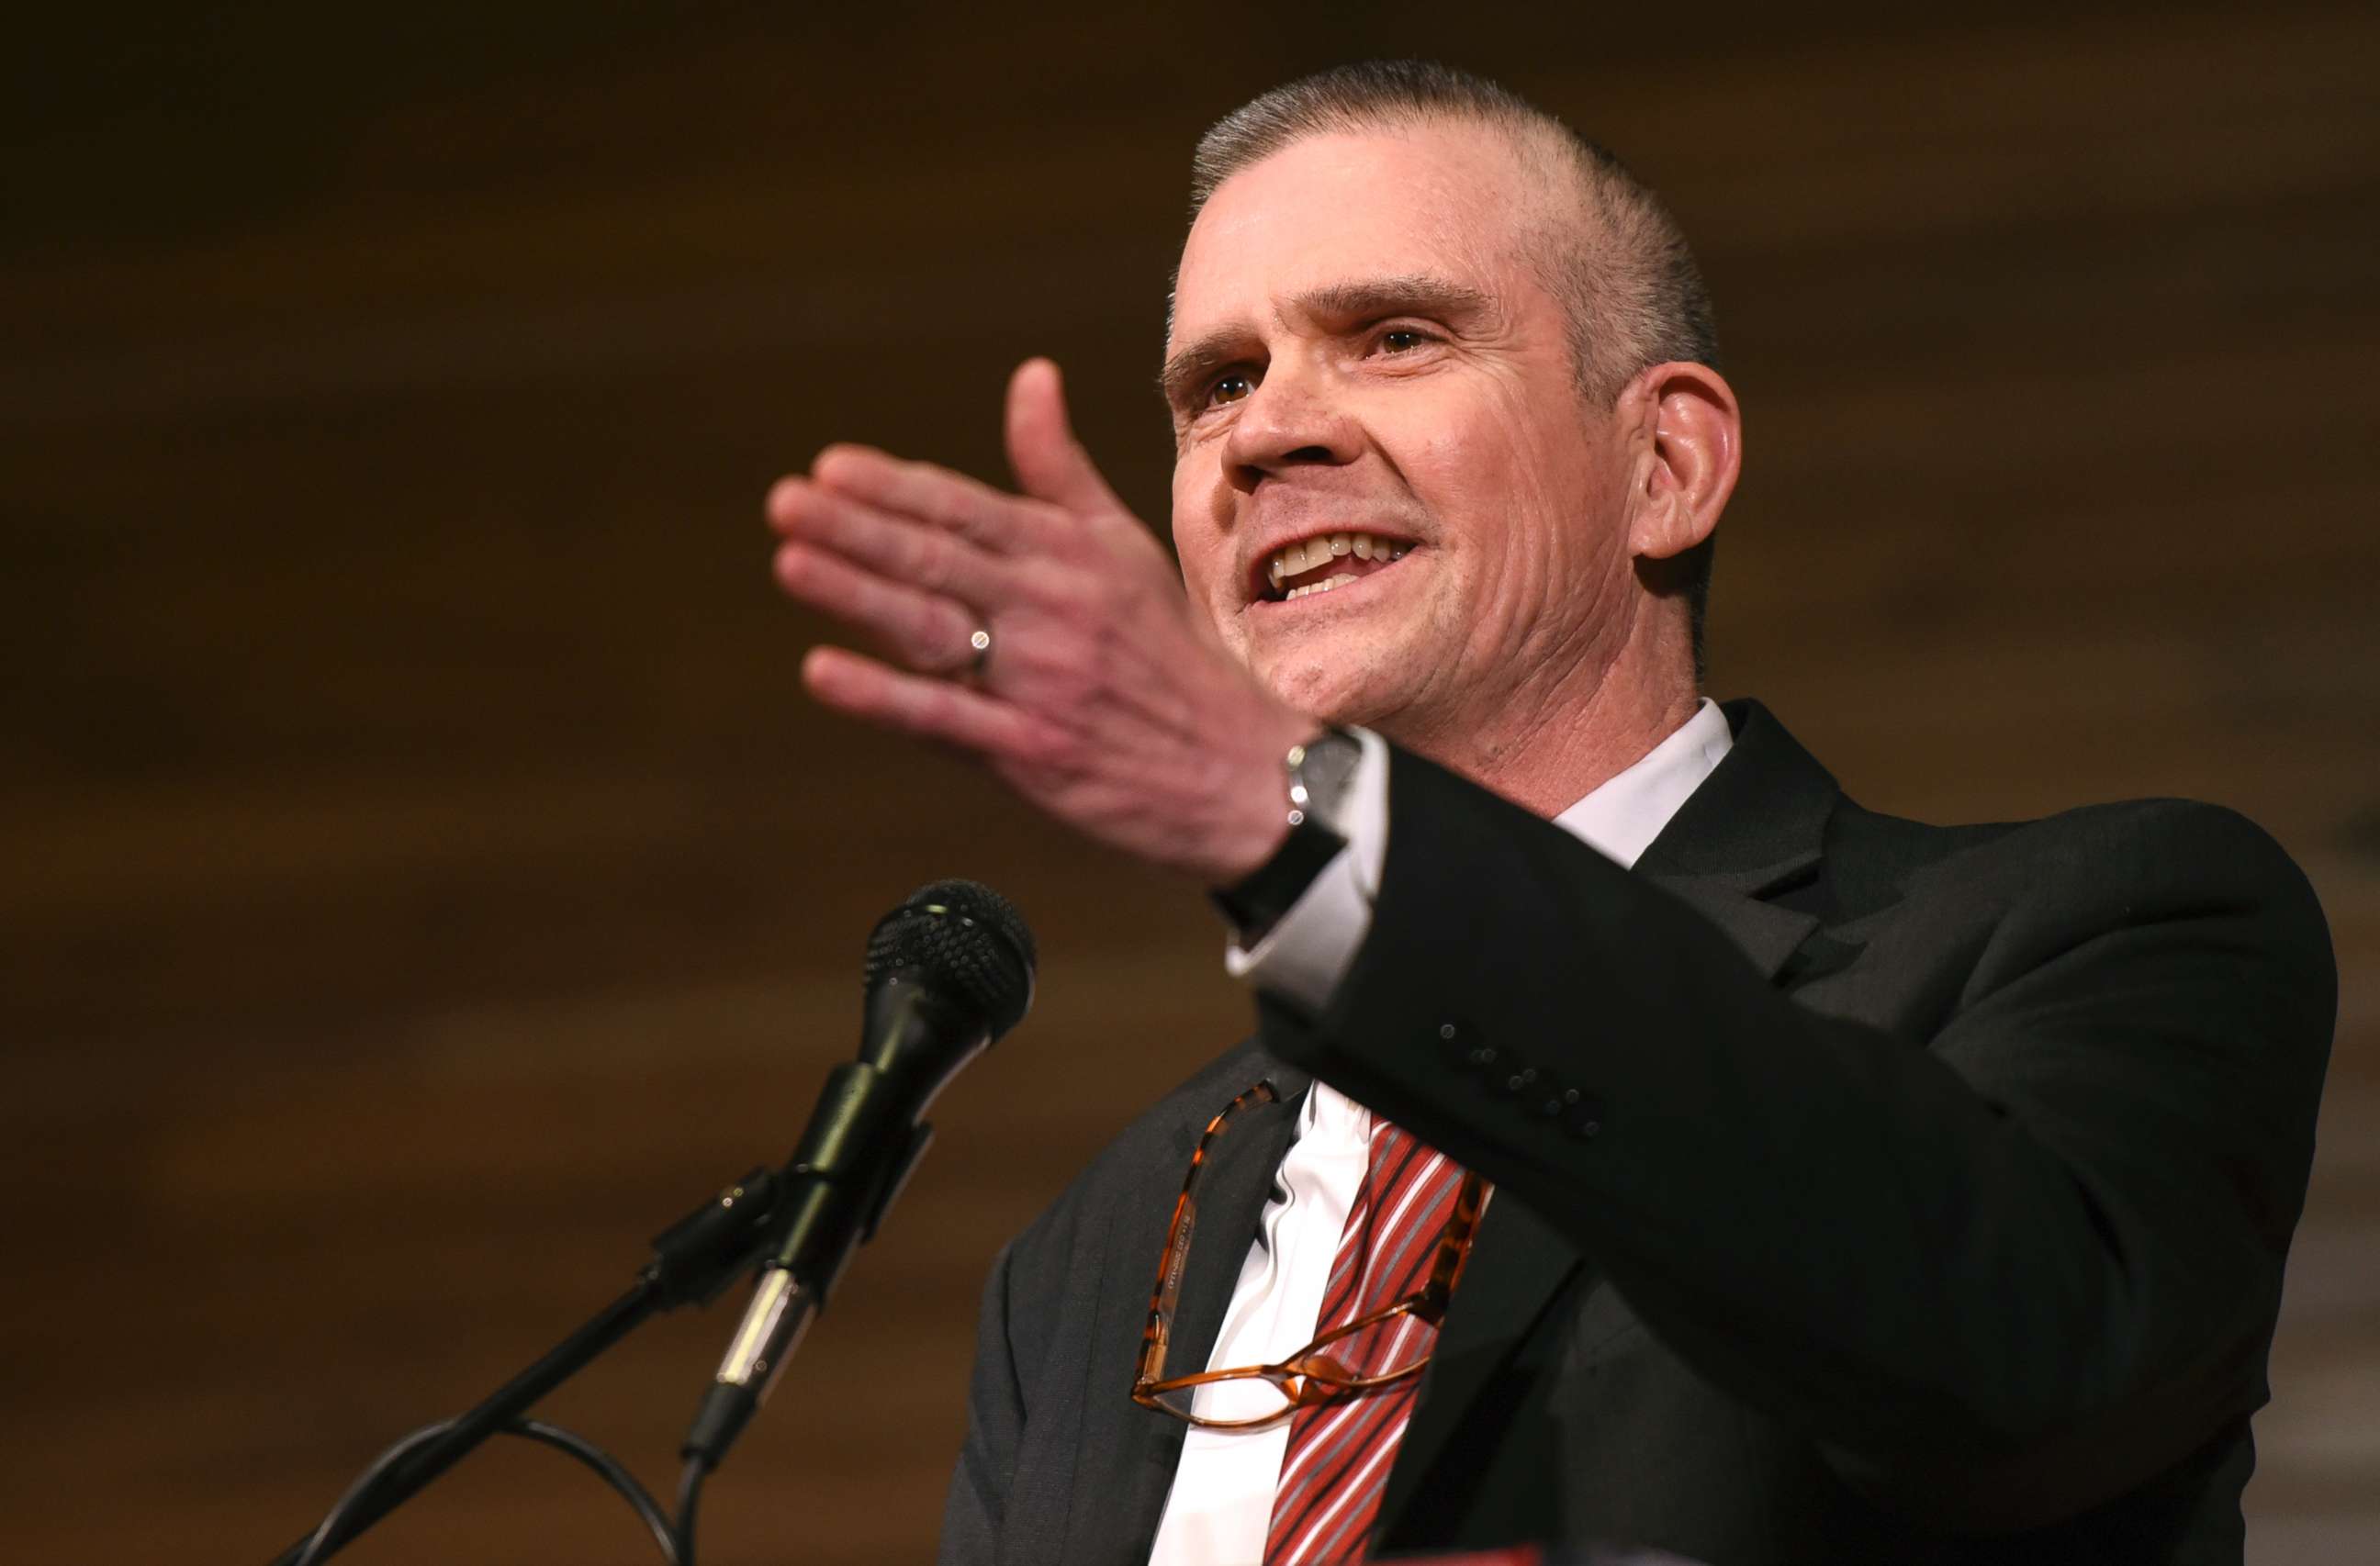 PHOTO: Matt Rosendale, a candidate for the Republican nomination to the U.S. Senate answers a question during a debate at Montana State University in Bozeman, Mont., March 22, 2018. 